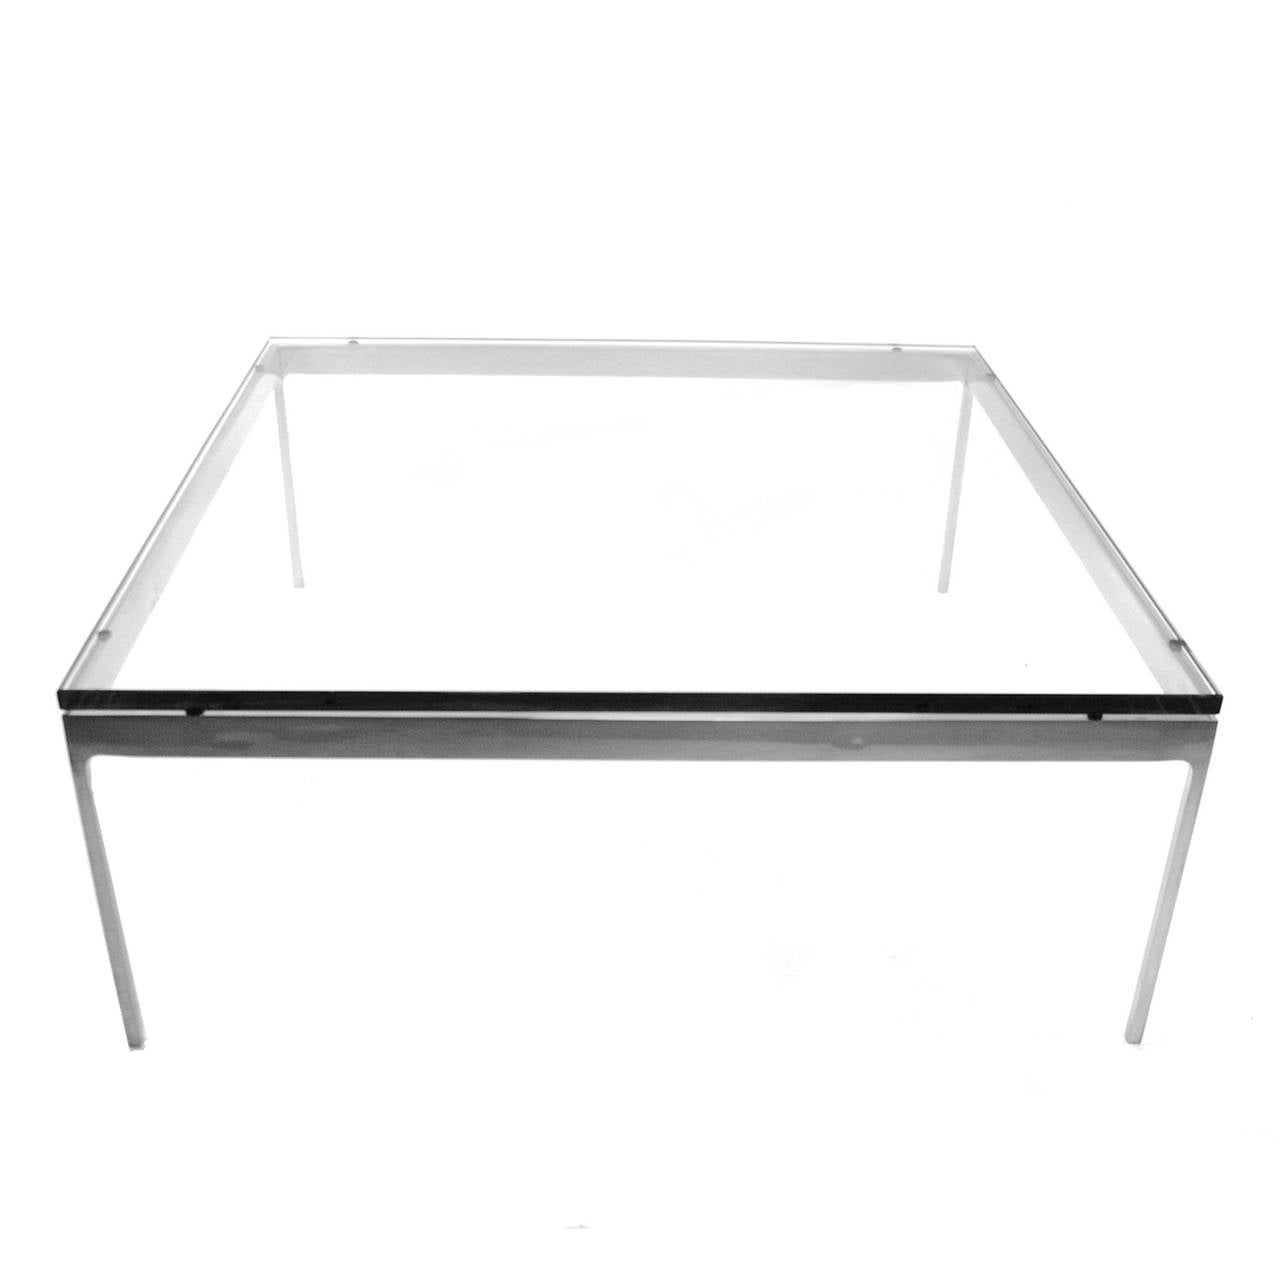 A very sophisticated yet minimalist low coffee table by Nicos Zographos. 3/4